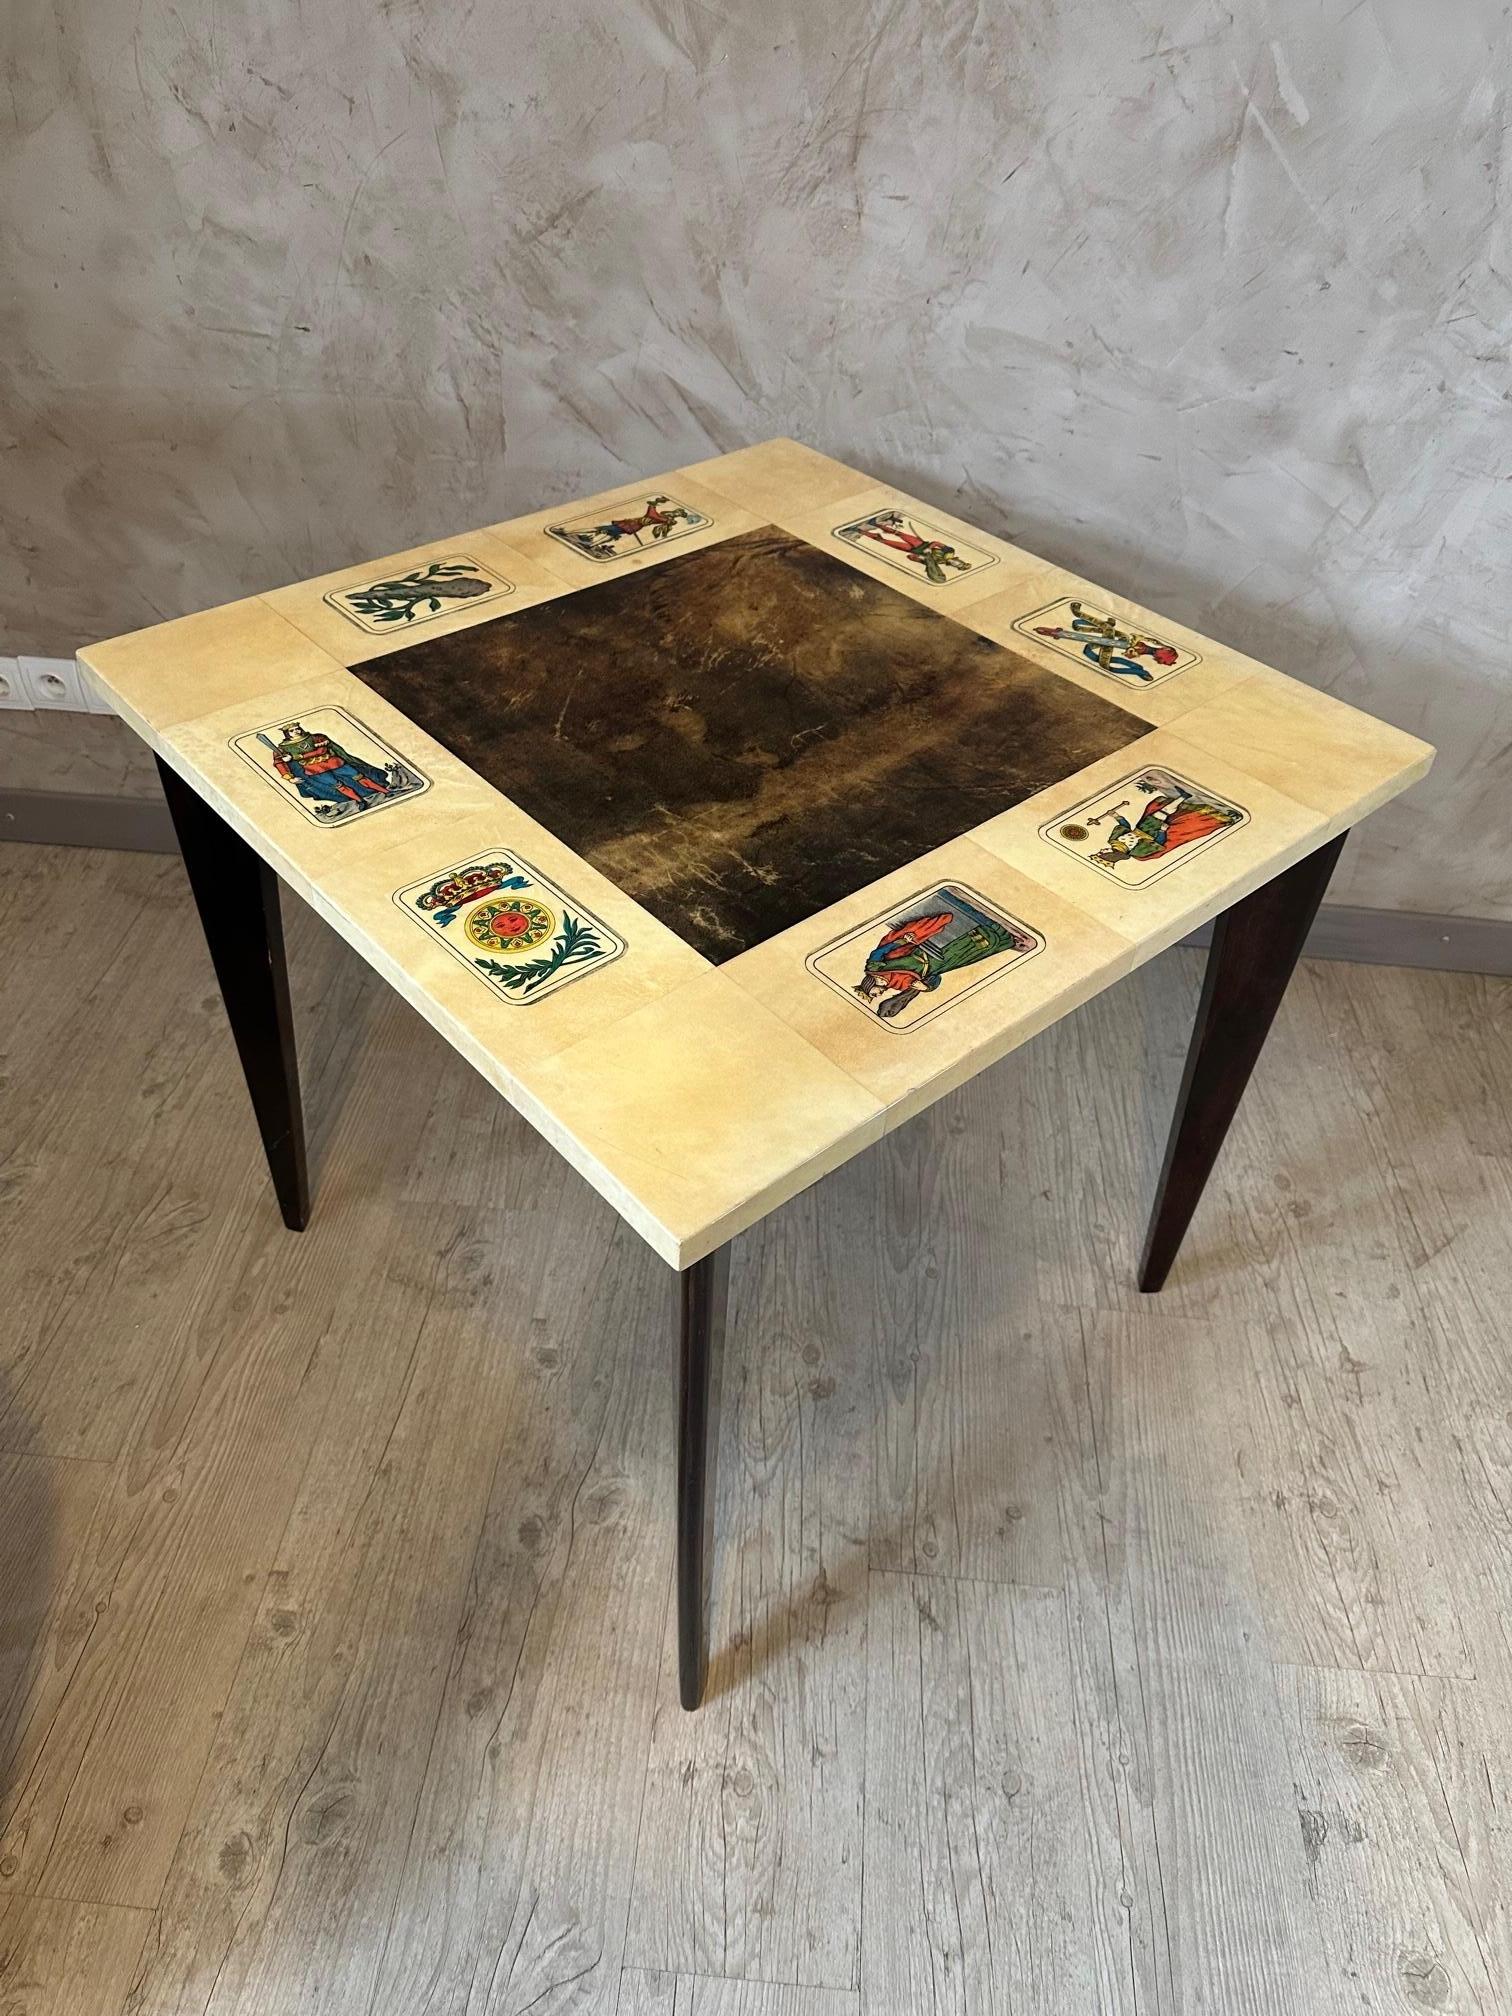 20th century Aldo Tura Lacquered Goatskin and Walnut Table With Chairs, 1960s For Sale 11